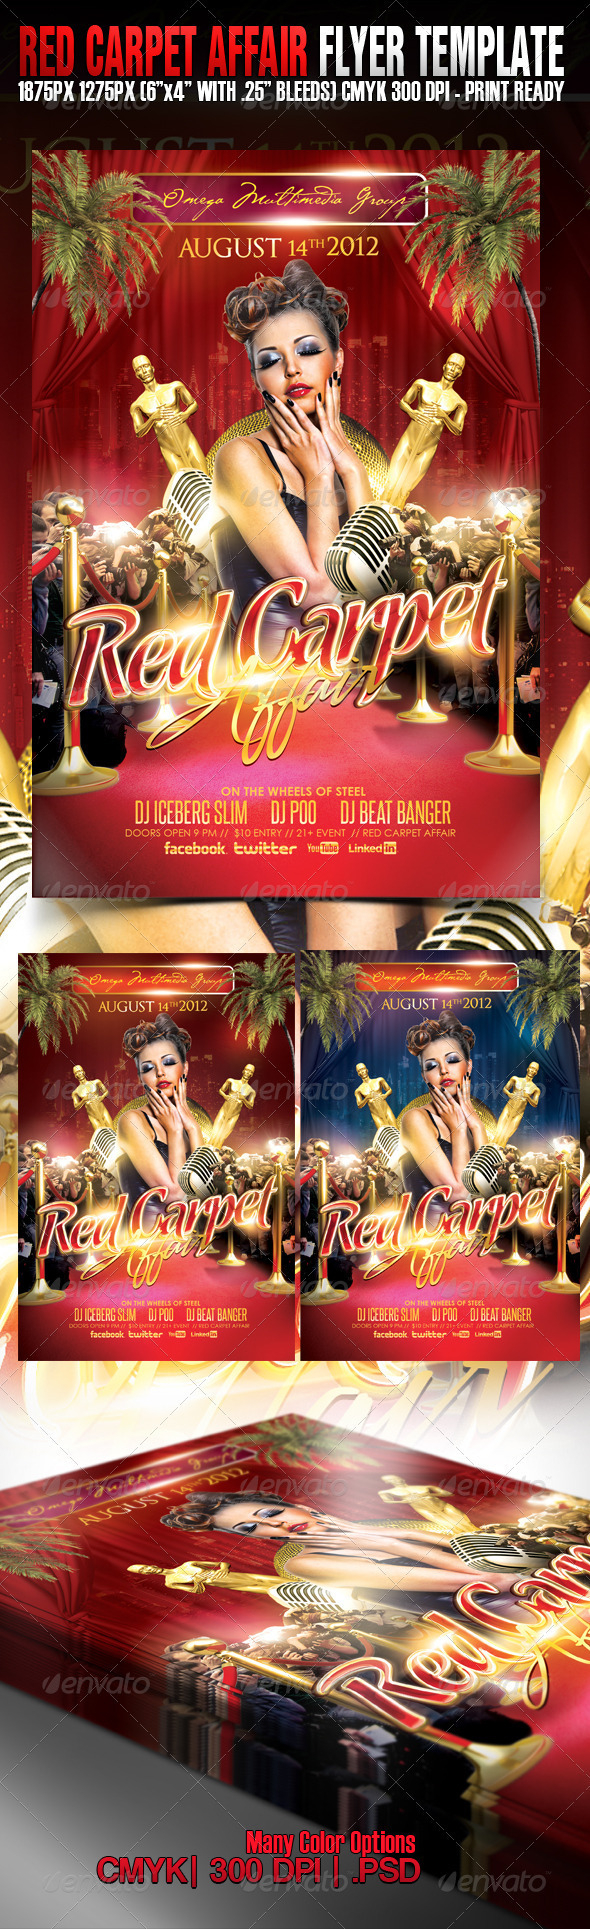 Red Carpet Flyer Collection #10  Louis Twelve In Red Carpet Event Flyer Template